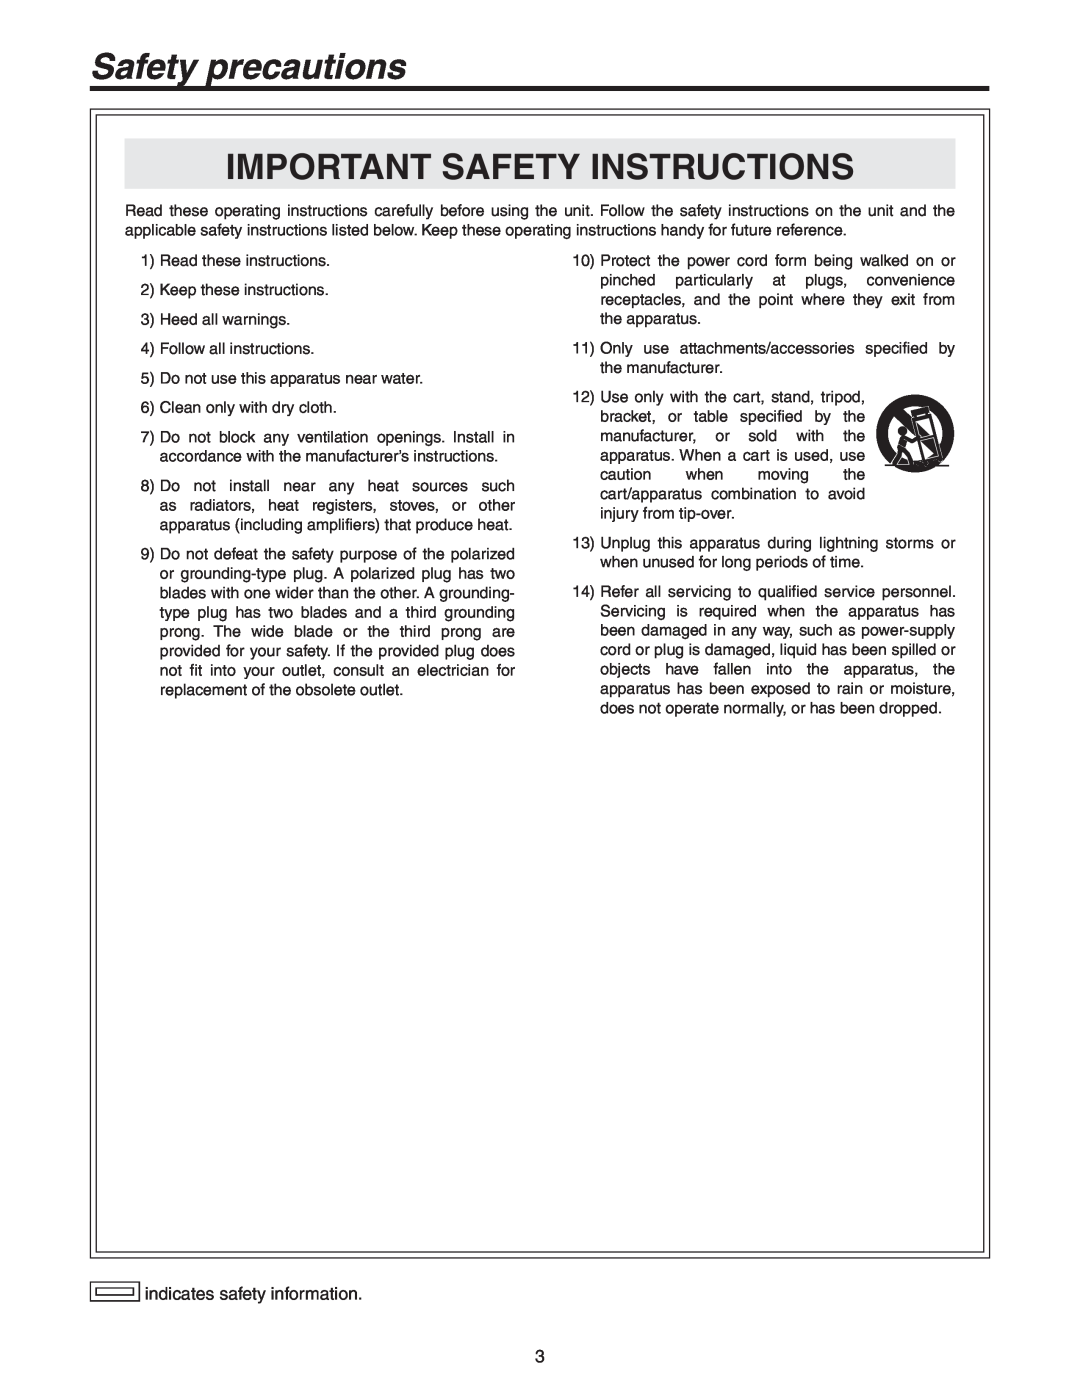 Panasonic AW-RP50N operating instructions Important Safety Instructions, Safety precautions, indicates safety information 